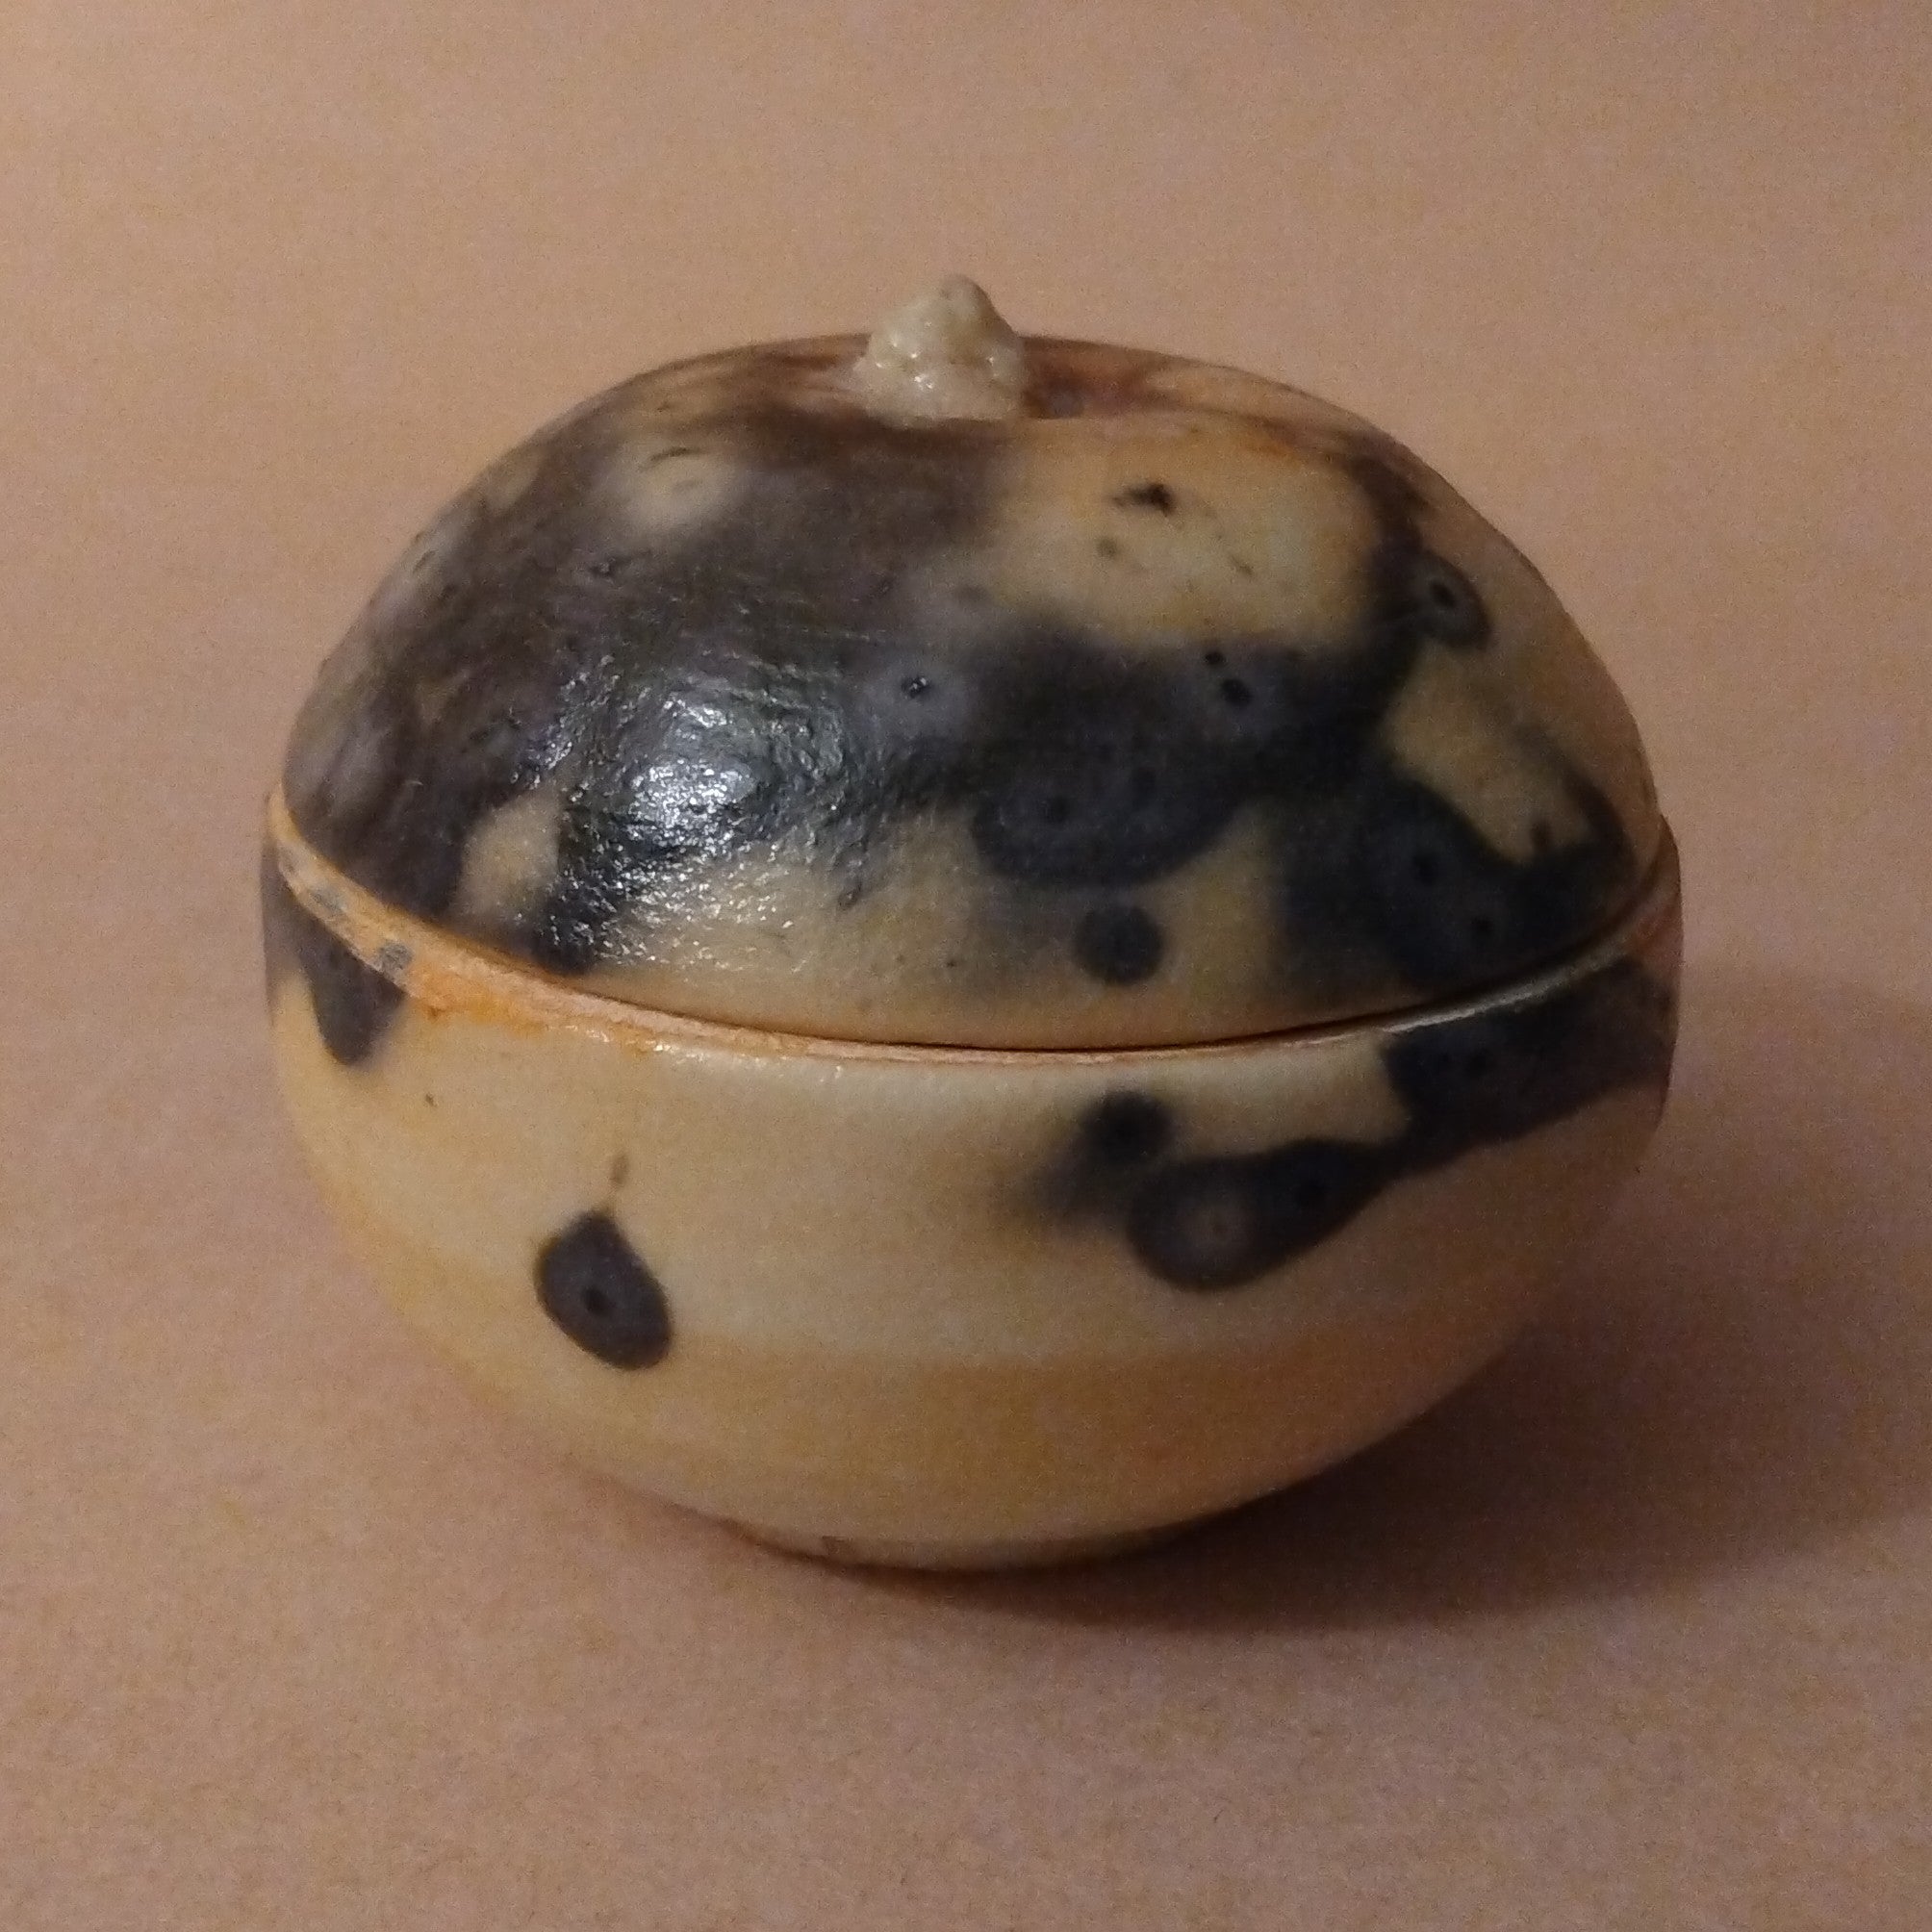 Kogo, Incense Container, Apple-shaped, by George Gledhill